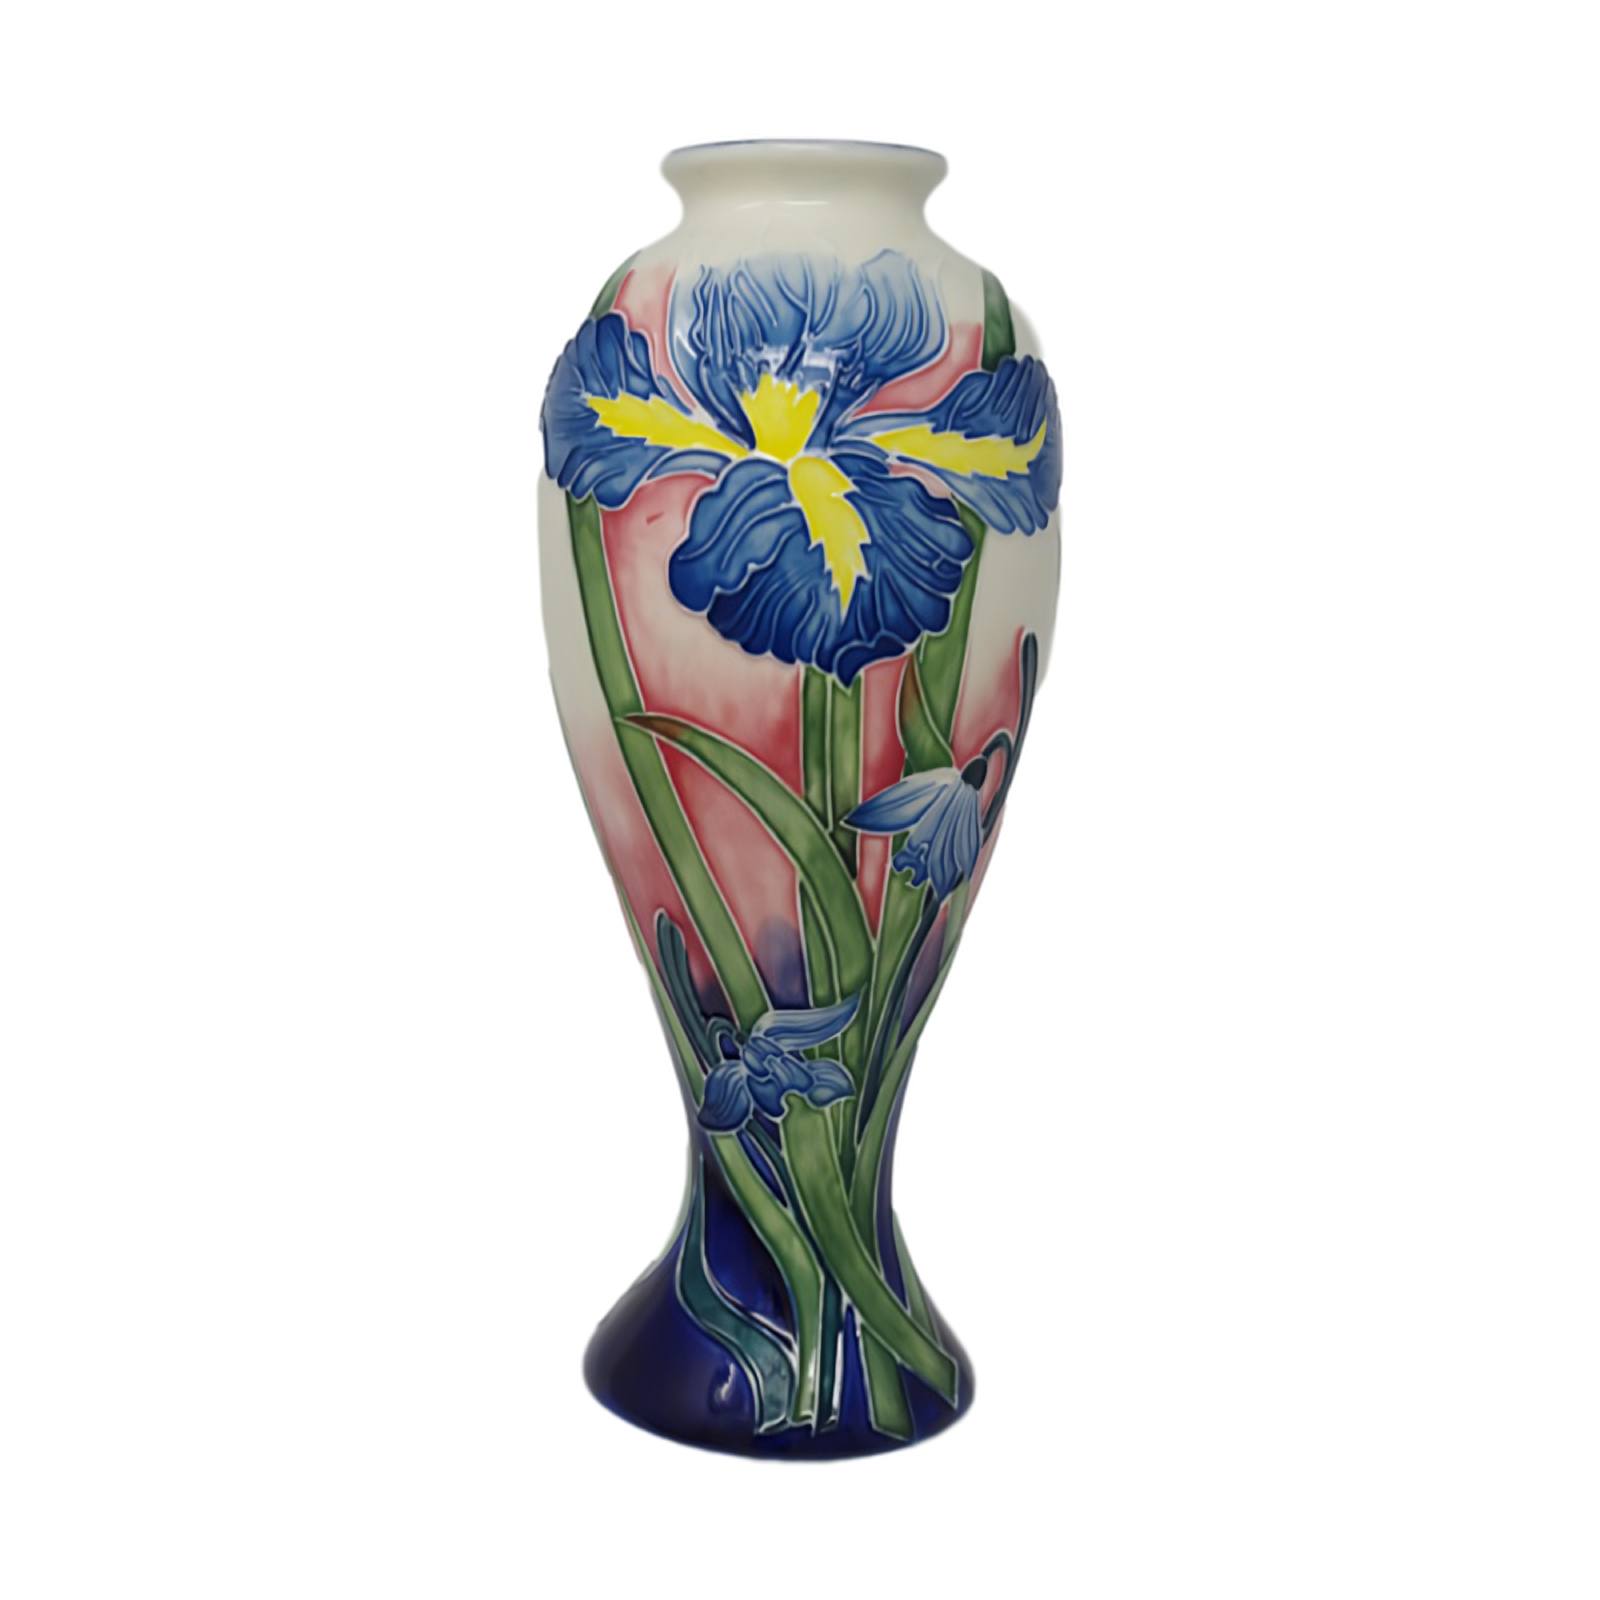 tube lined vase hand painted with floral design 11inches tall ceramic vase